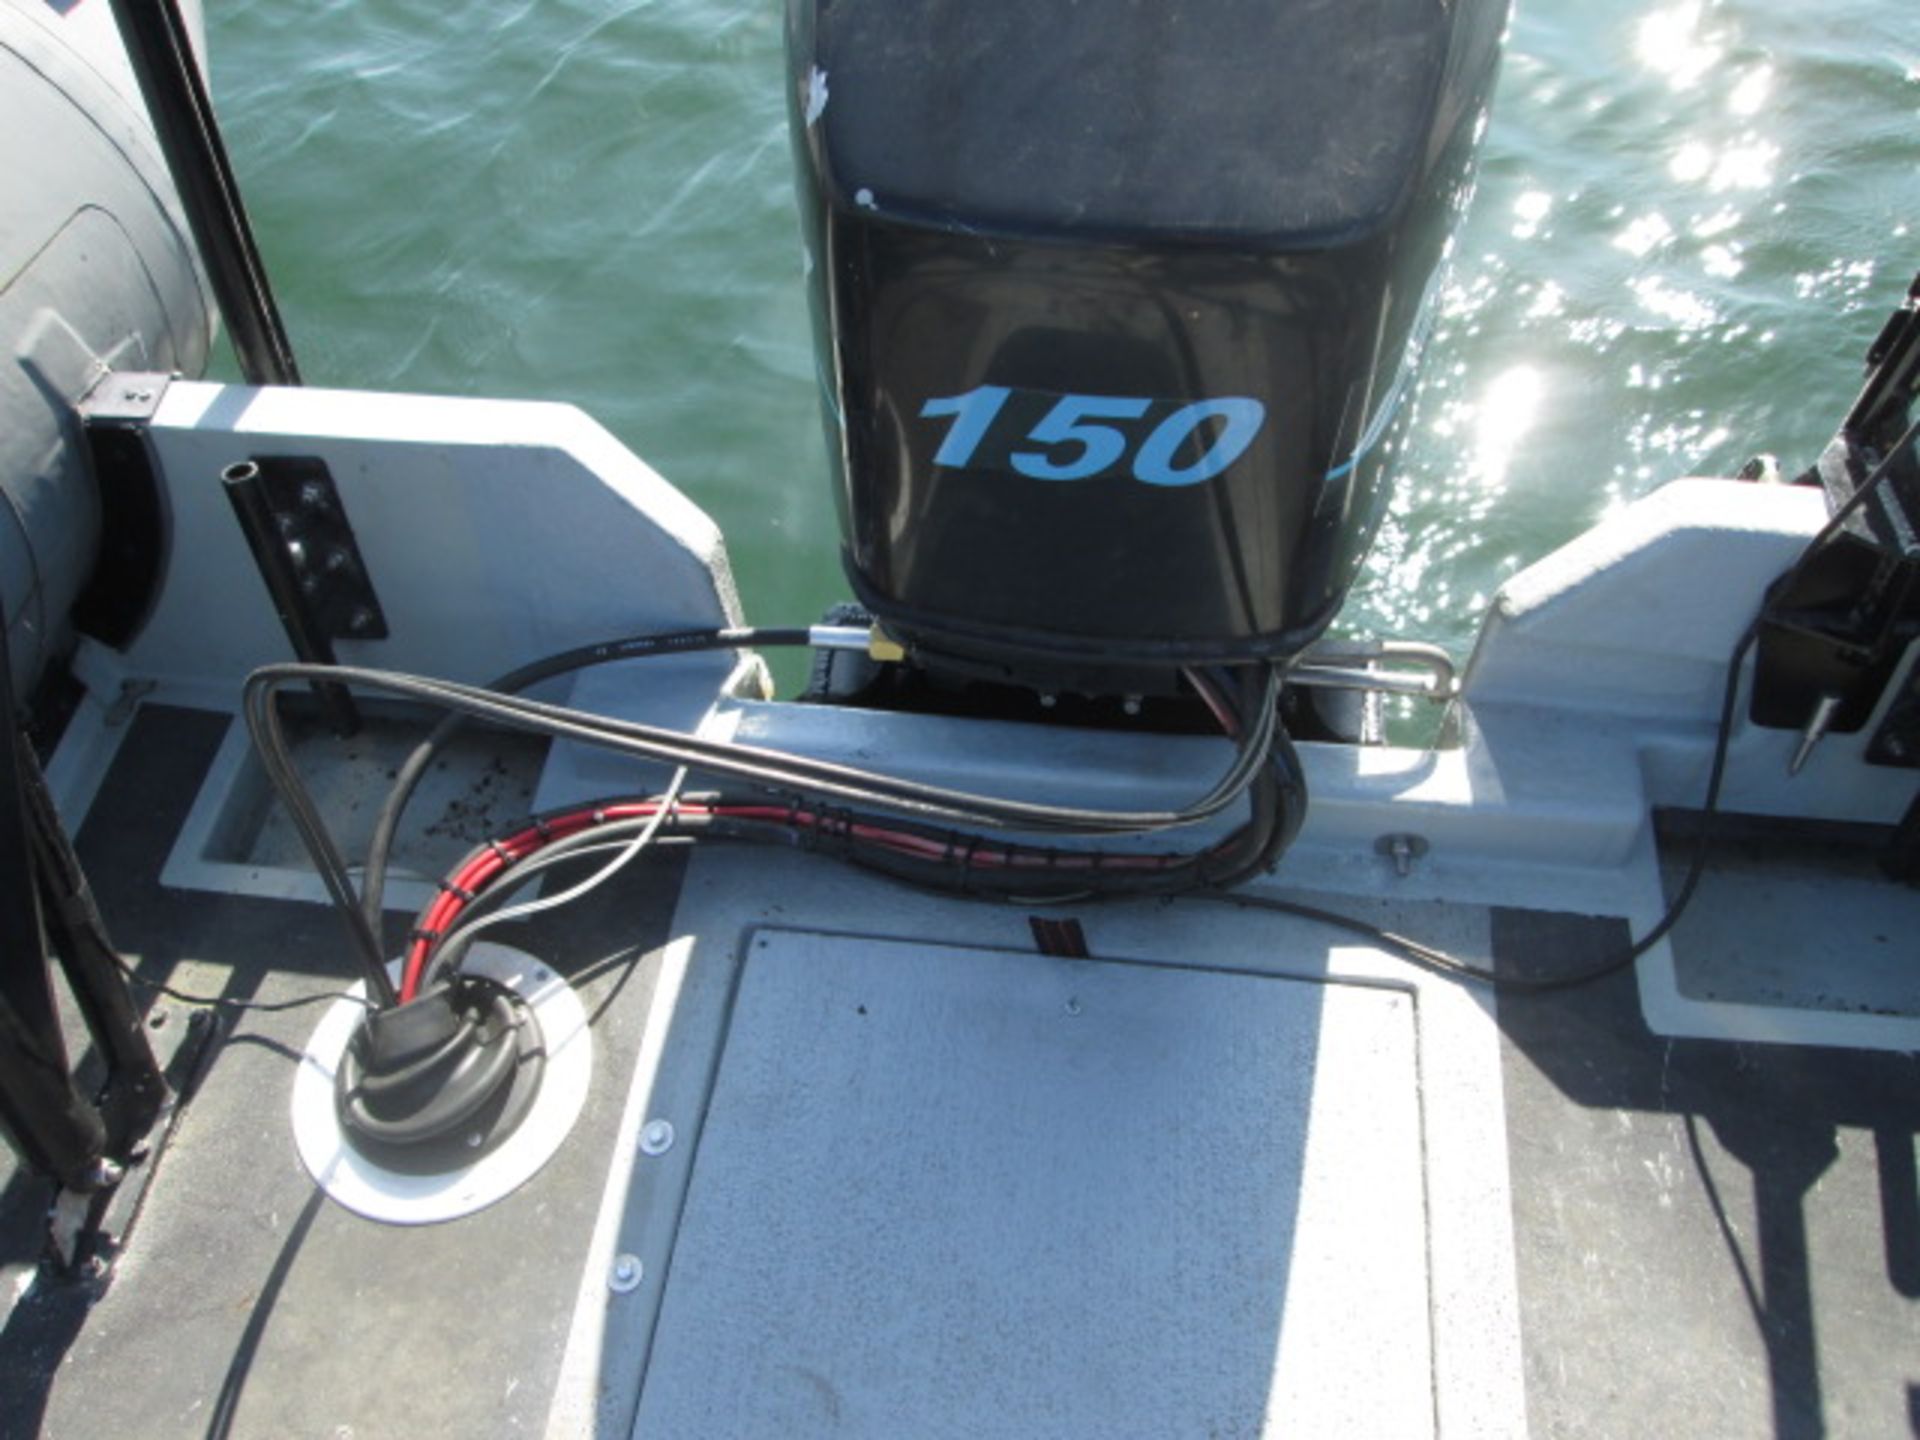 Halmatic 22 Military Spec RIB Boat - Mercury 6 cylinder 2 stroke 150hp outboard - Length 7 - Image 19 of 36